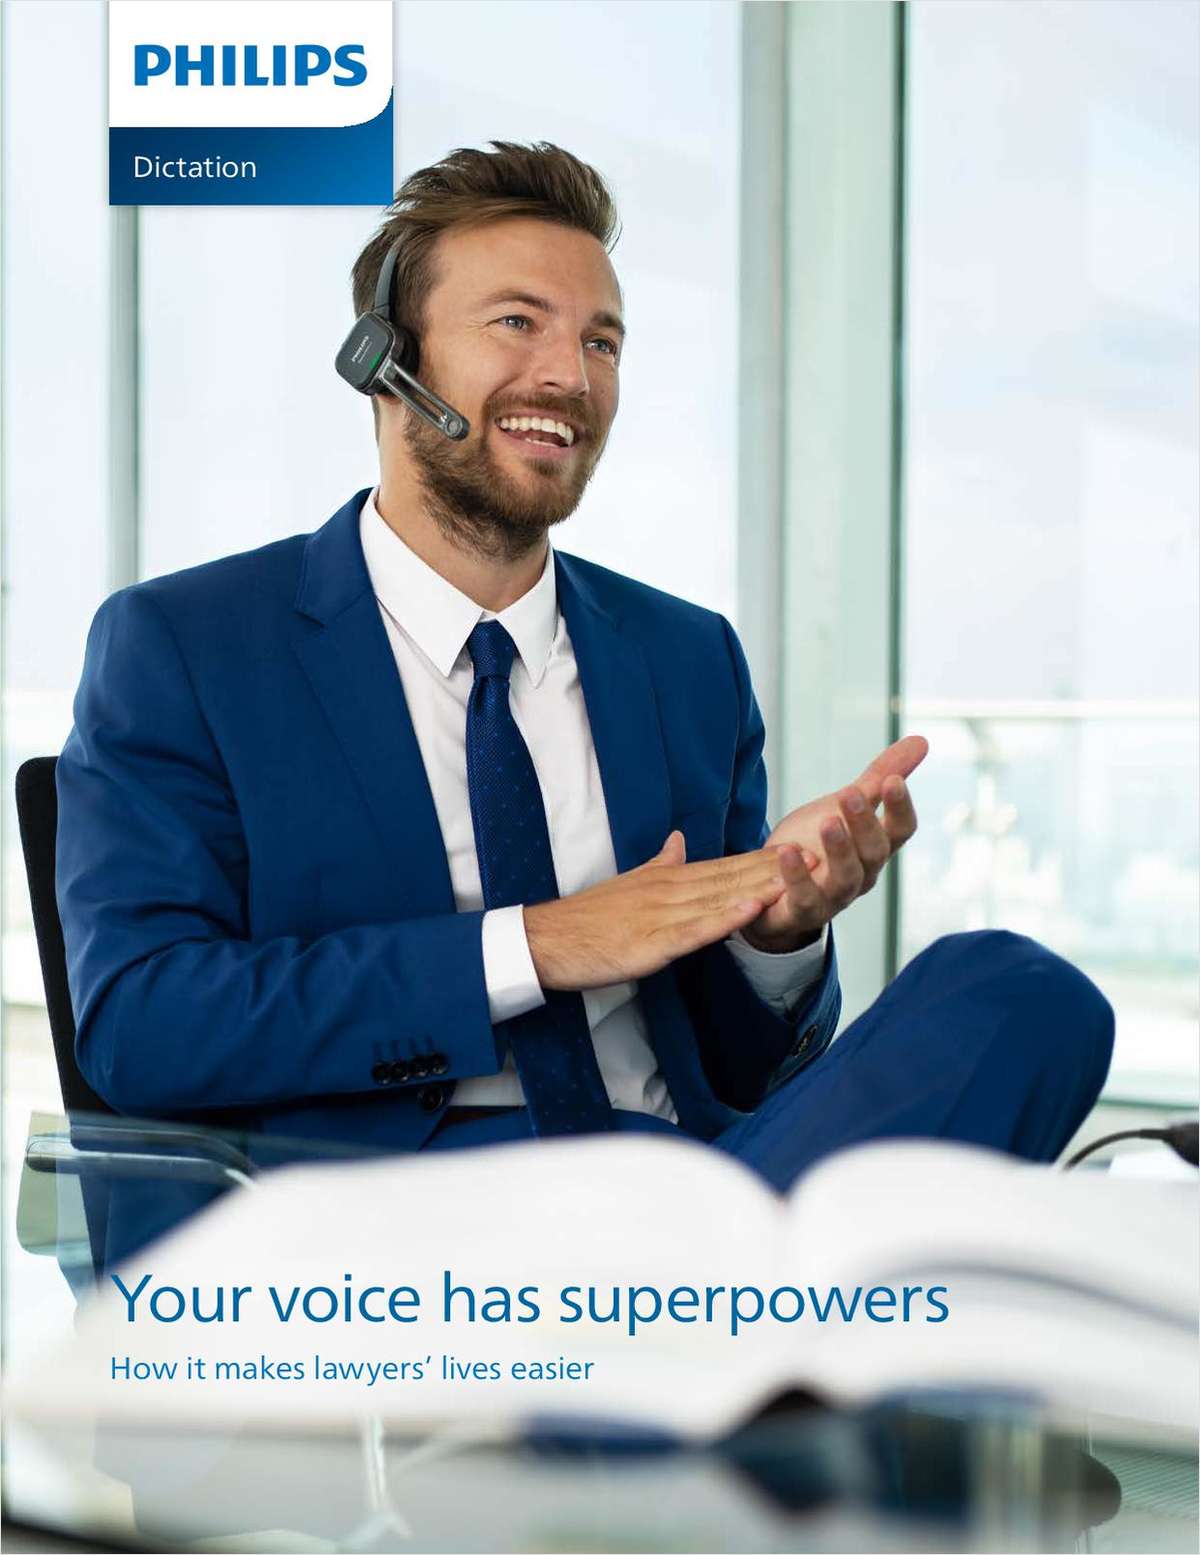 Developments in voice-controlled technology are growing dramatically and will help the legal industry eliminate trivial tasks, freeing up time and resources for what matters most: clients. Download this white paper to learn how you can use your voice to make your job so much easier.